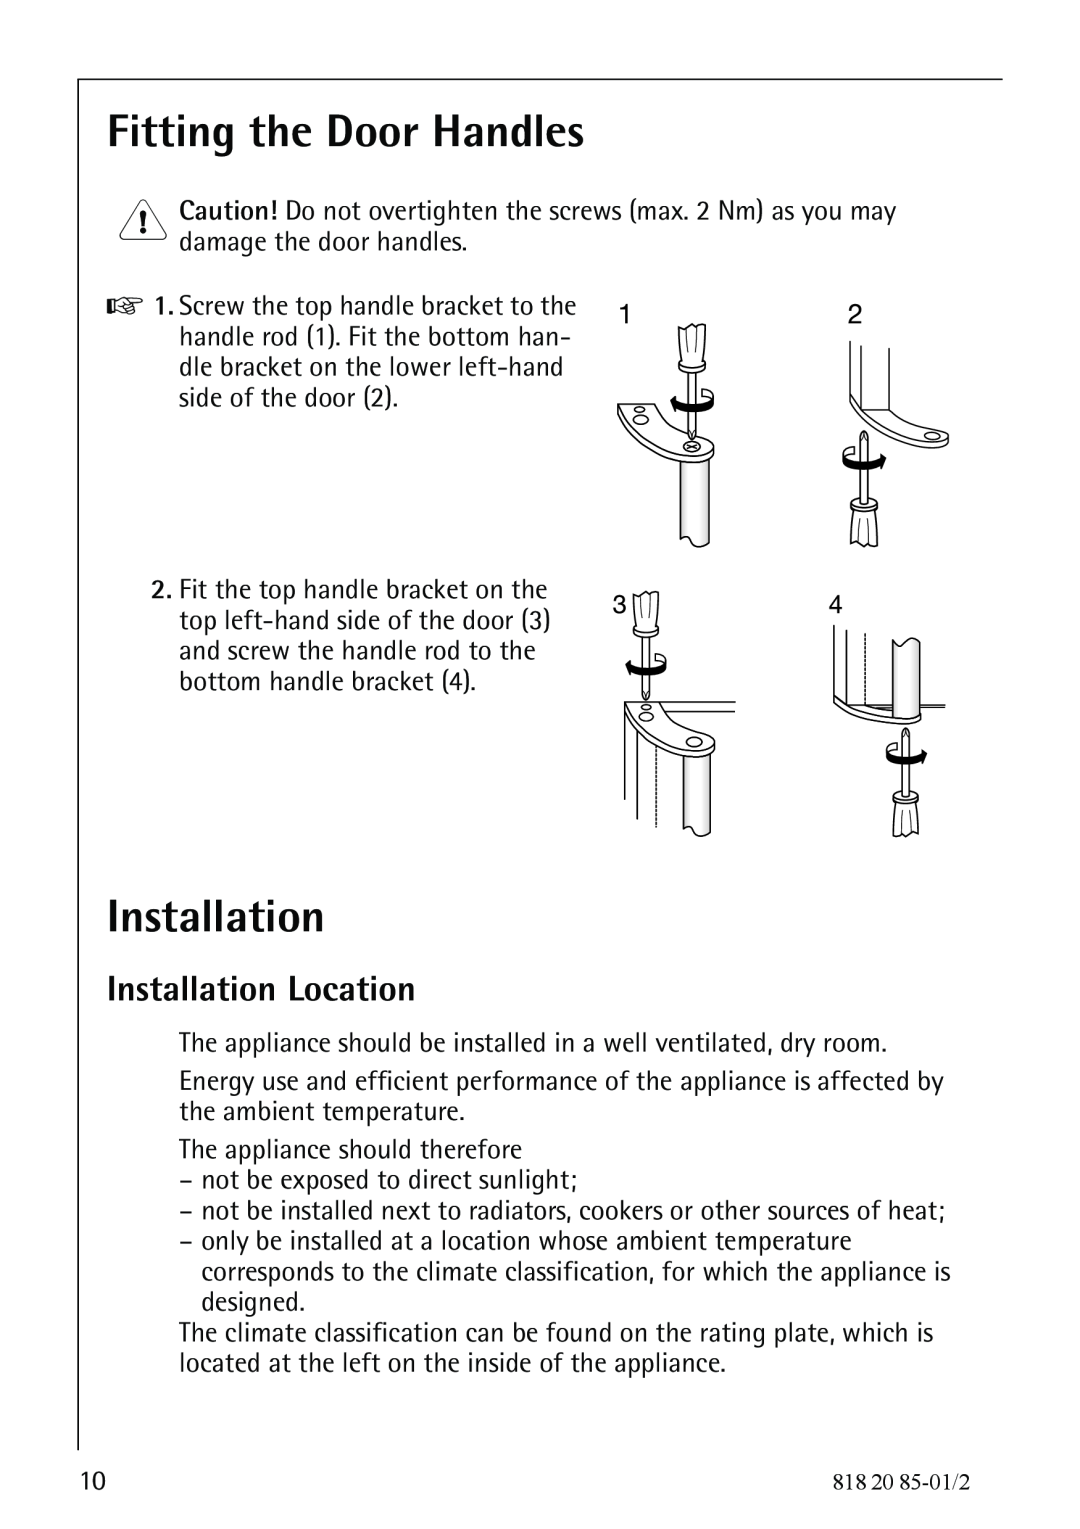 Electrolux 818 20 85 operating instructions Fitting the Door Handles, Installation Location 